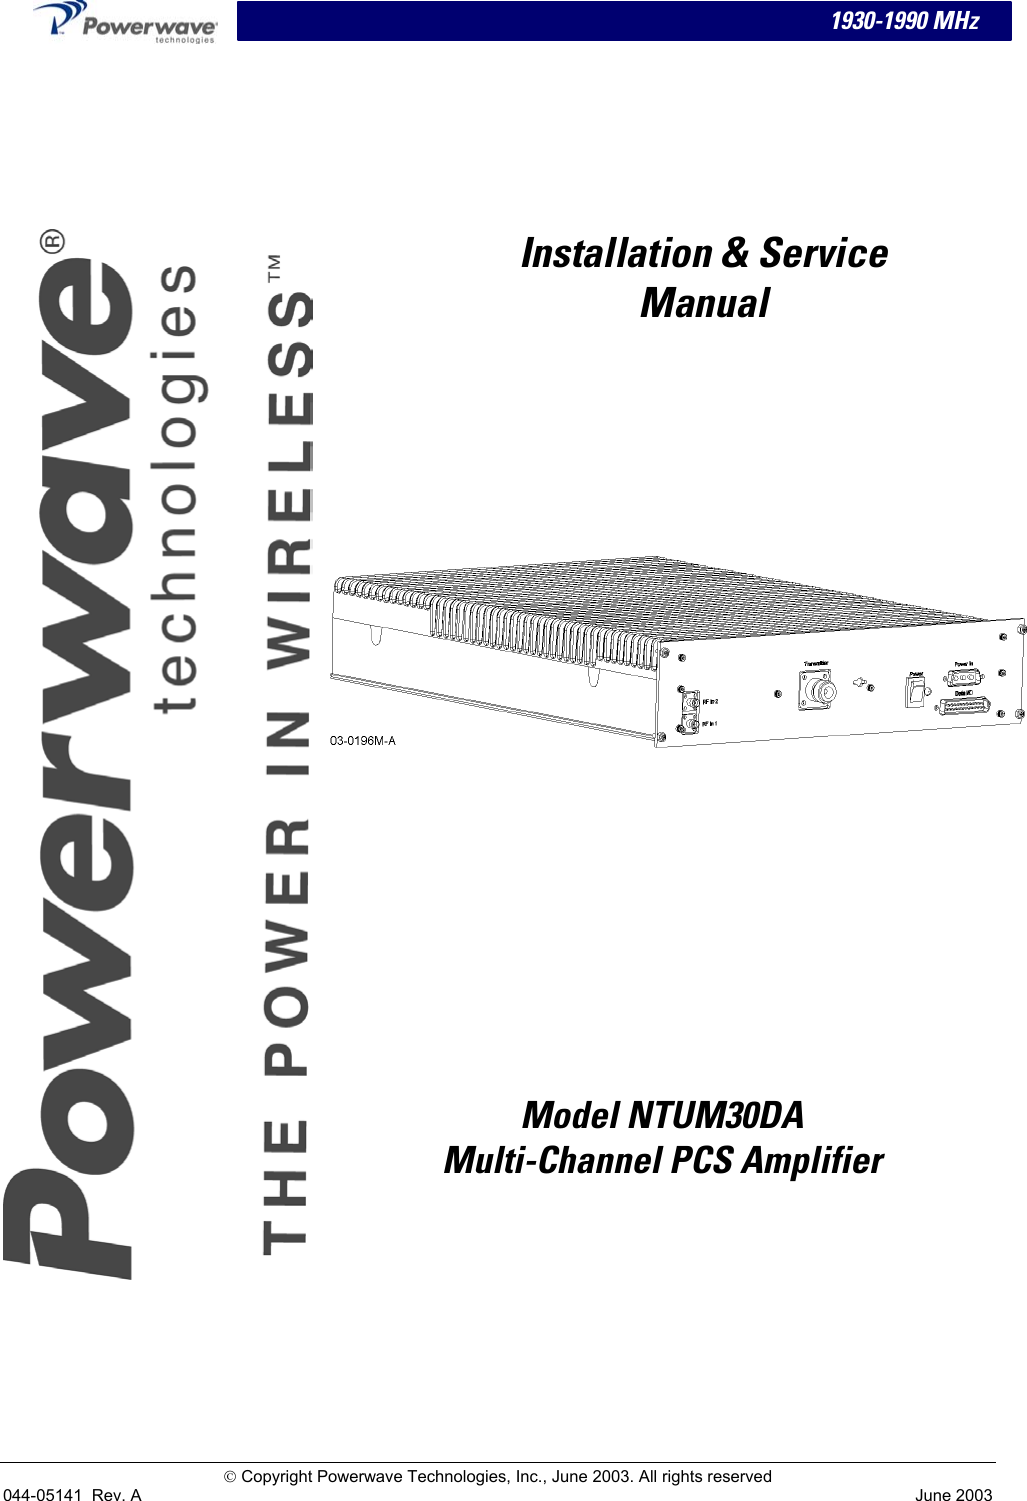   1930-1990 MHz      Installation &amp; Service Manual                  Model NTUM30DA  Multi-Channel PCS Amplifier  Copyright Powerwave Technologies, Inc., June 2003. All rights reserved 044-05141  Rev. A June 2003 